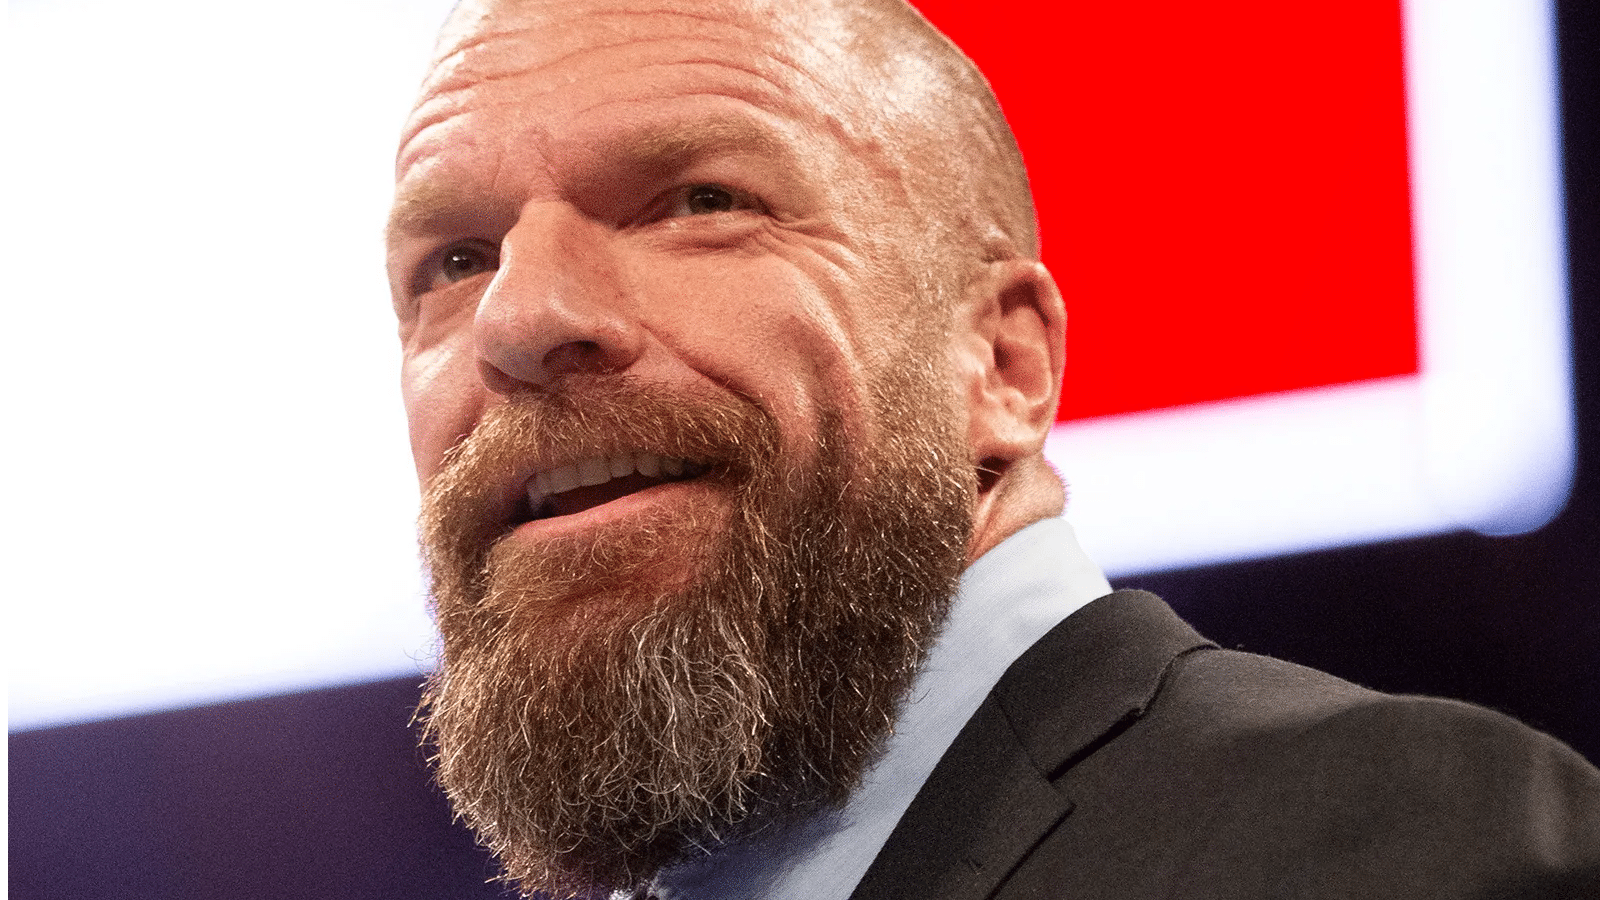 Former wrestler Triple H recovering from surgery after cardiac event: WWE